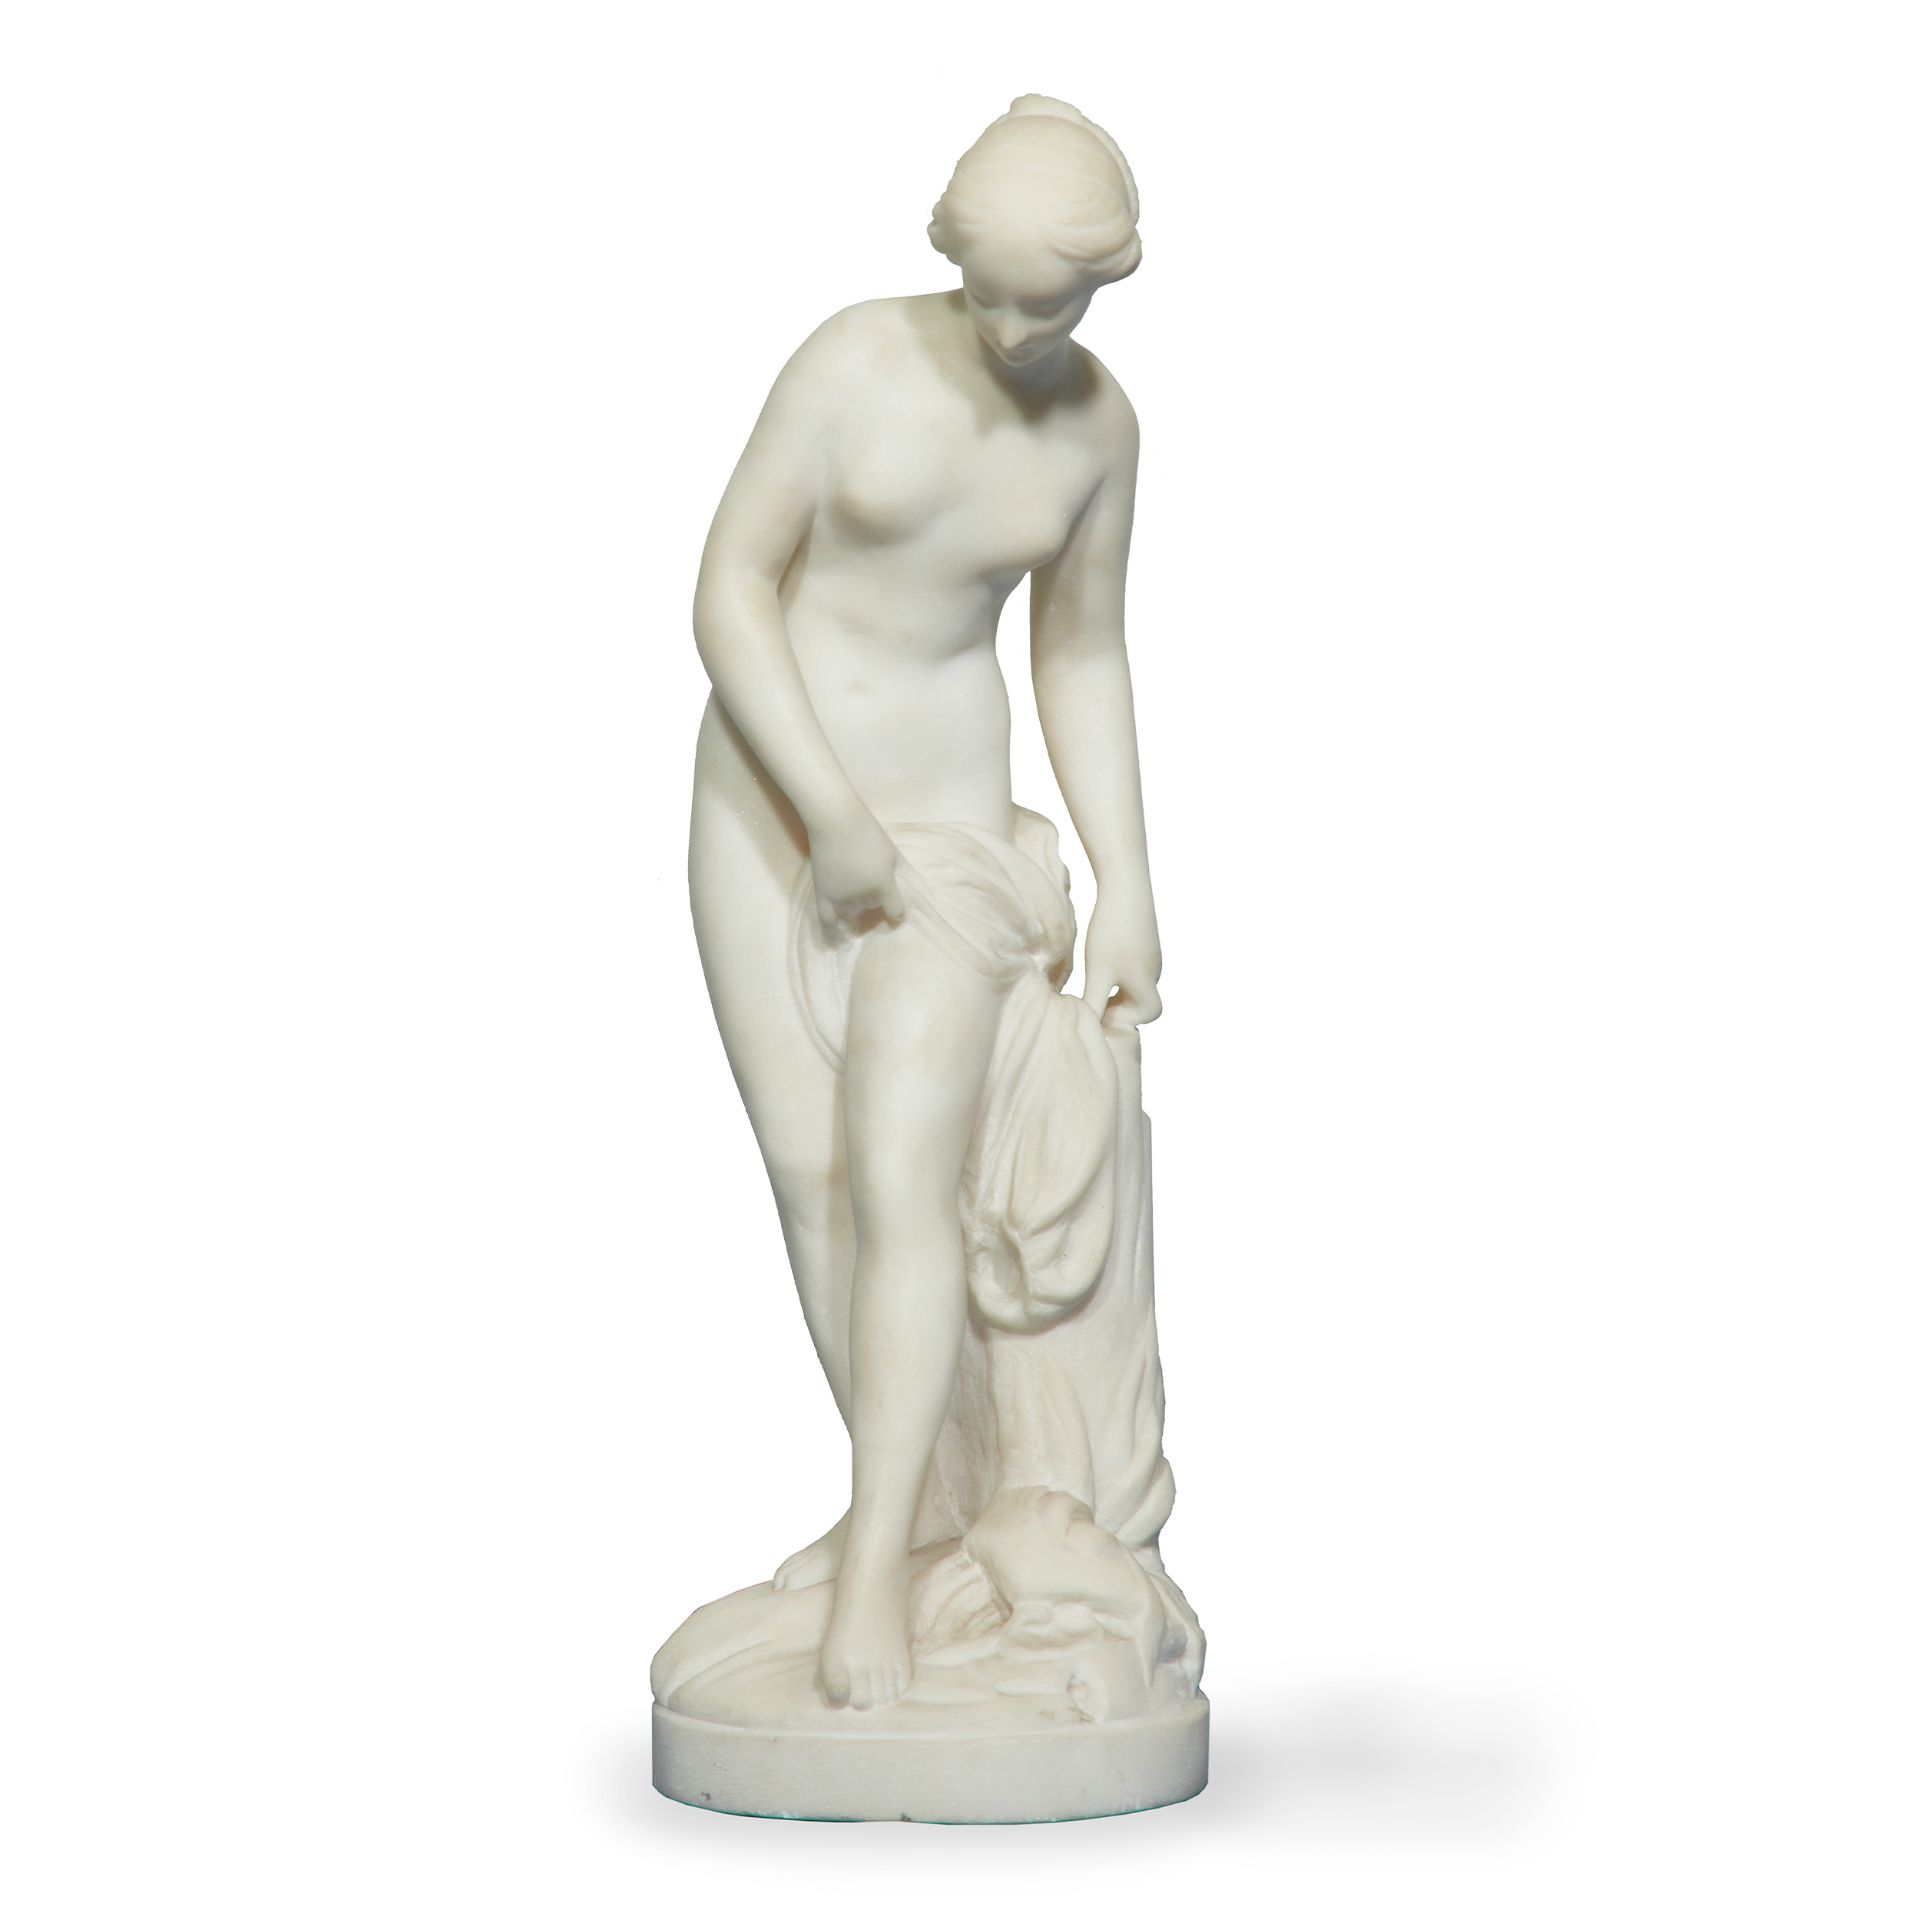 Etienne Maurice Falconet The batherwhite marble sculpture, 44cm. highSigned on the base: Falconnet